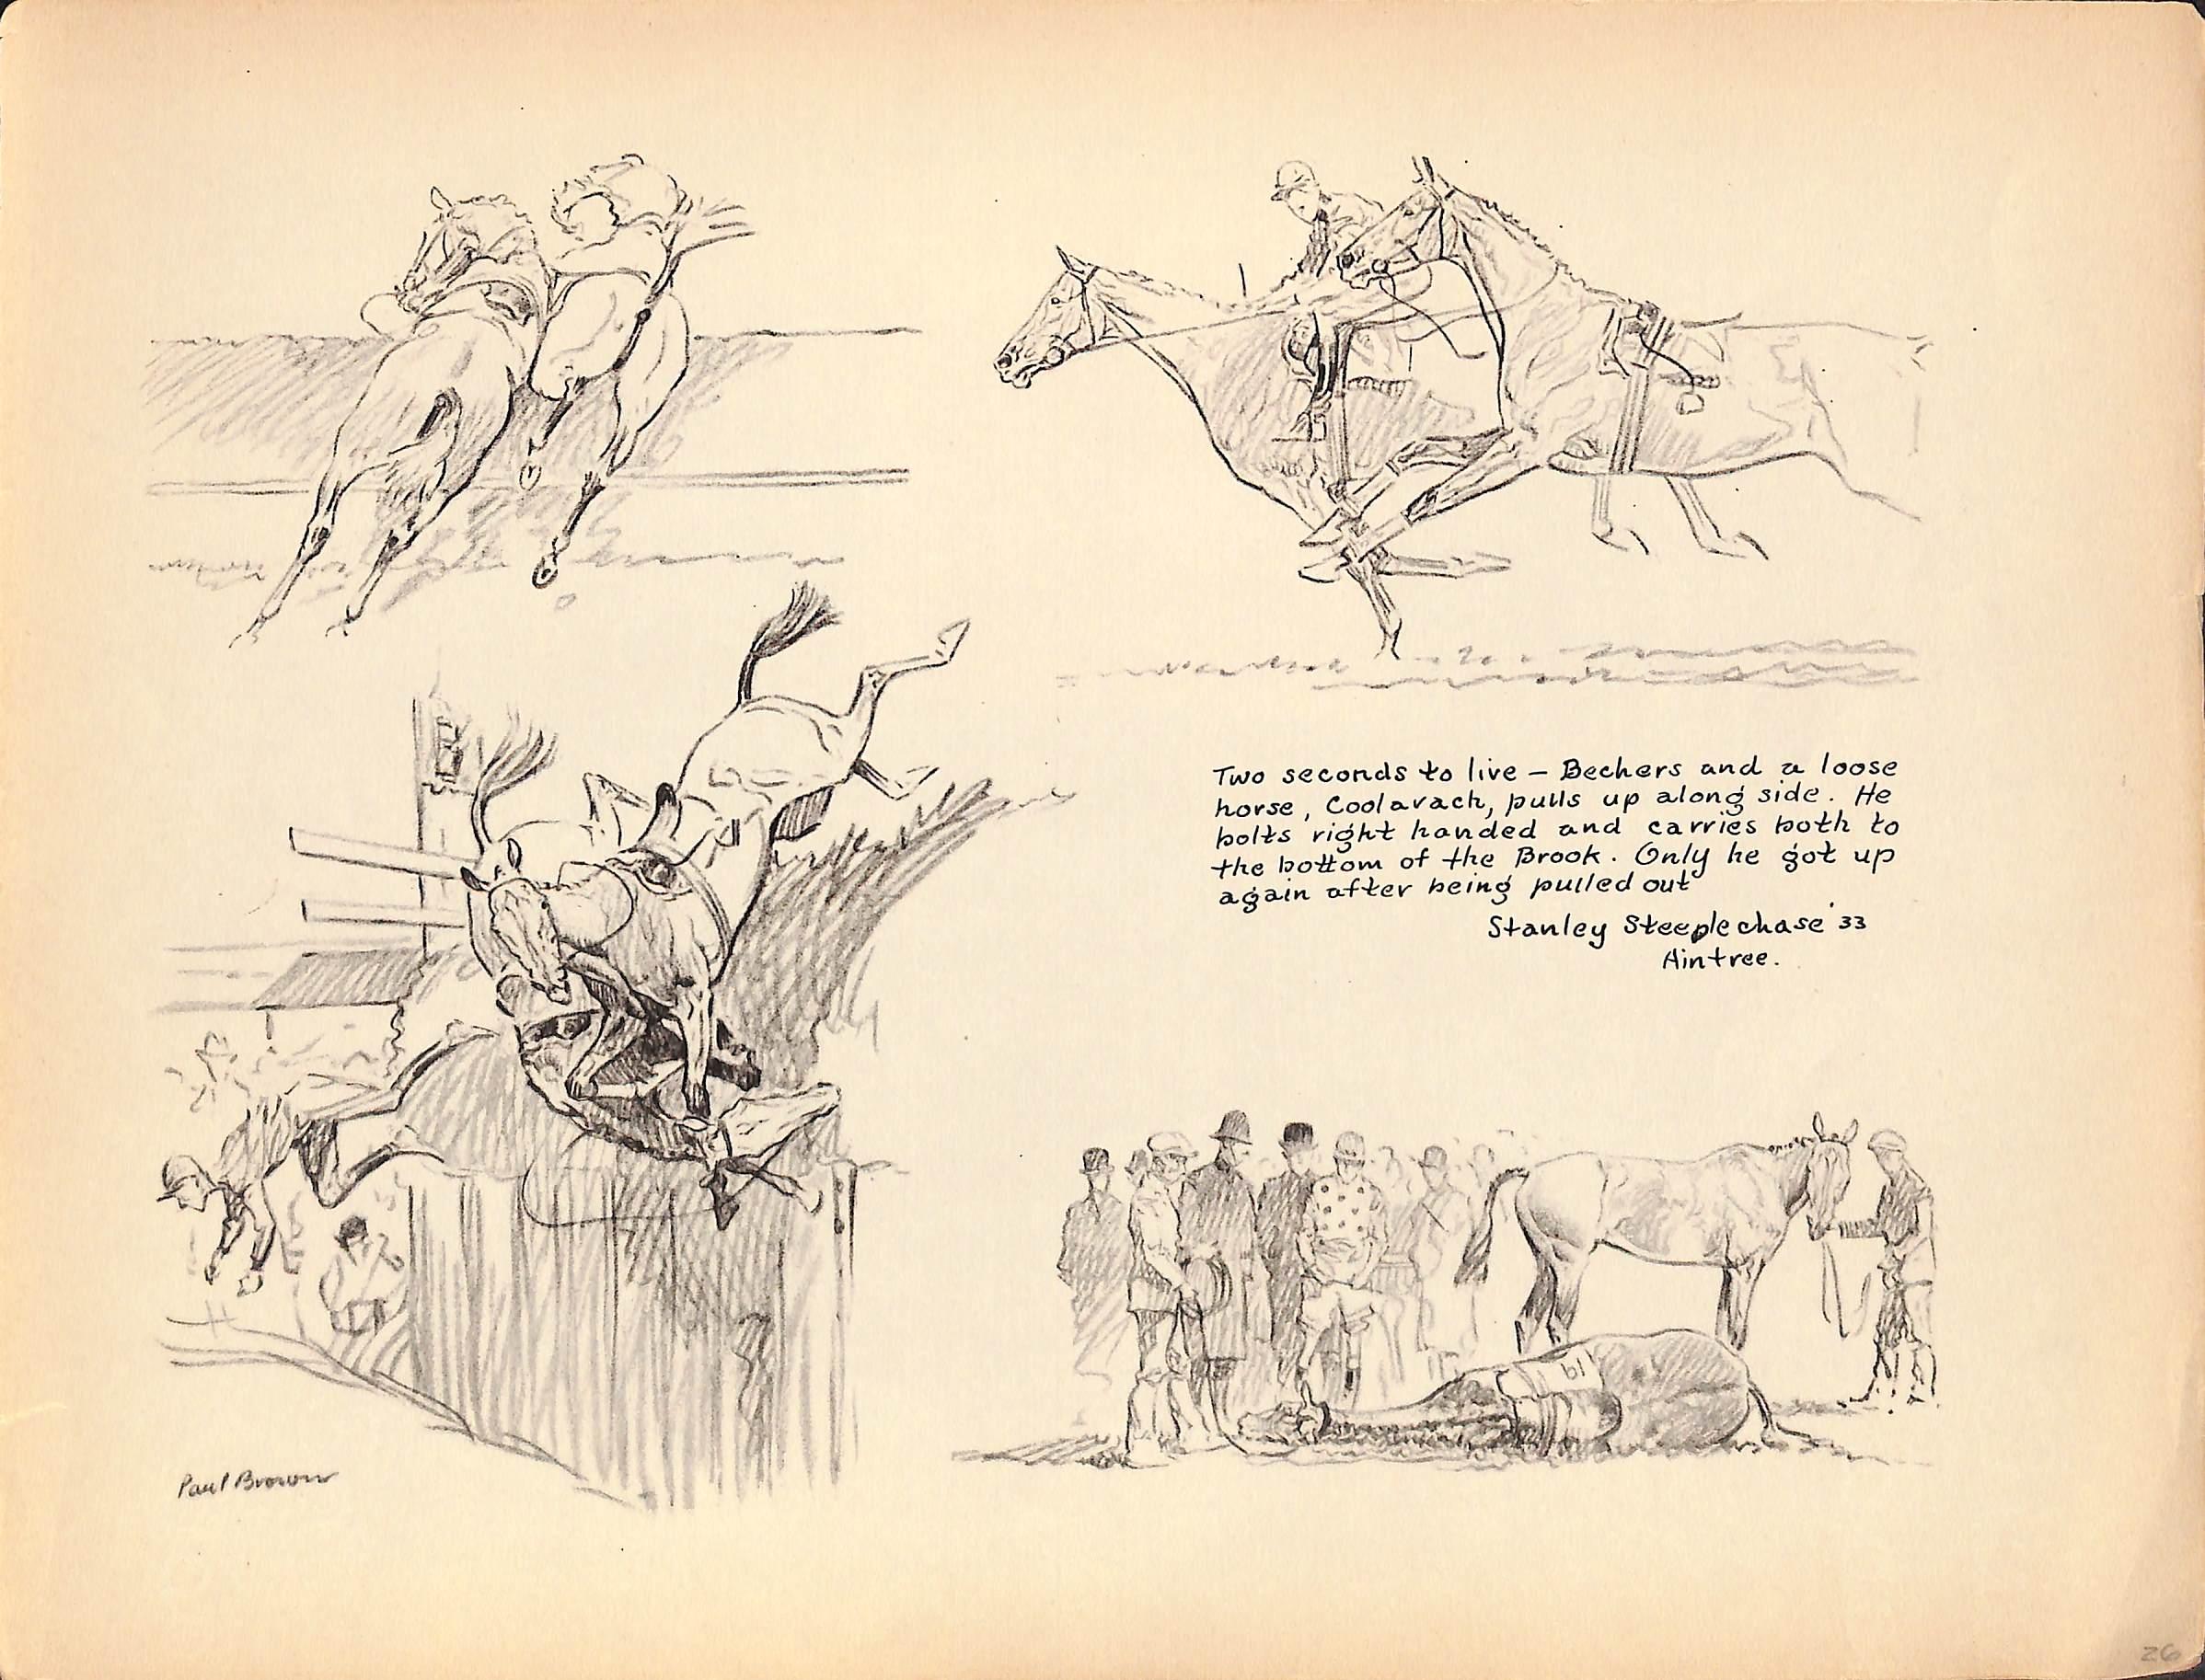 Two Seconds To Live Stanley Steeplechase '33 Aintree  - Art by Paul Desmond Brown